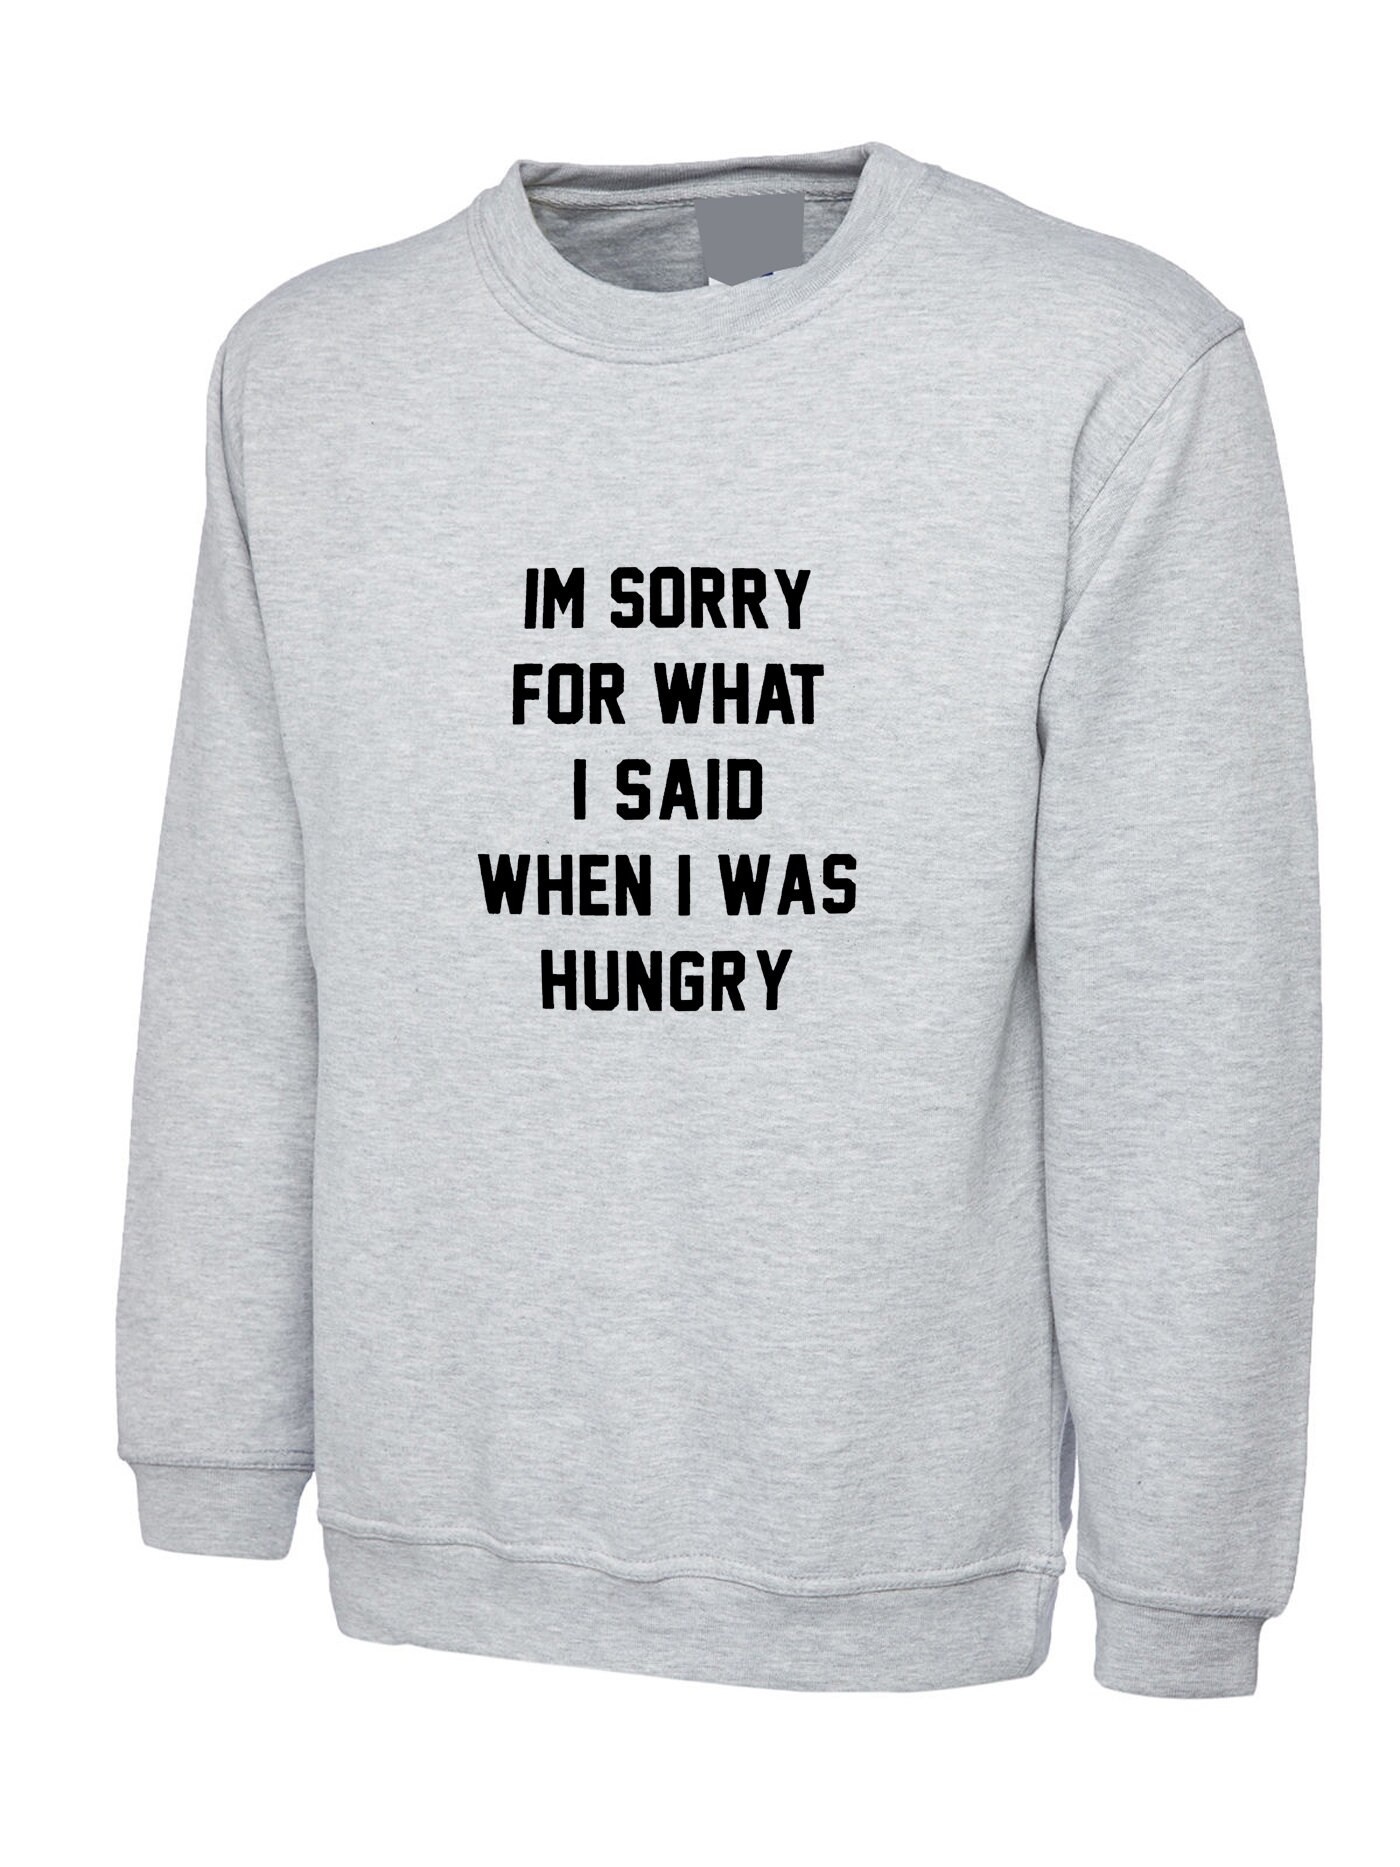 I'm Sorry for what I said when i was Hungry Sweatshirt Jumper Sweater Shirt Food Lover Ladies Funny Womens Mens Unisex Gift Rude Sarcastic